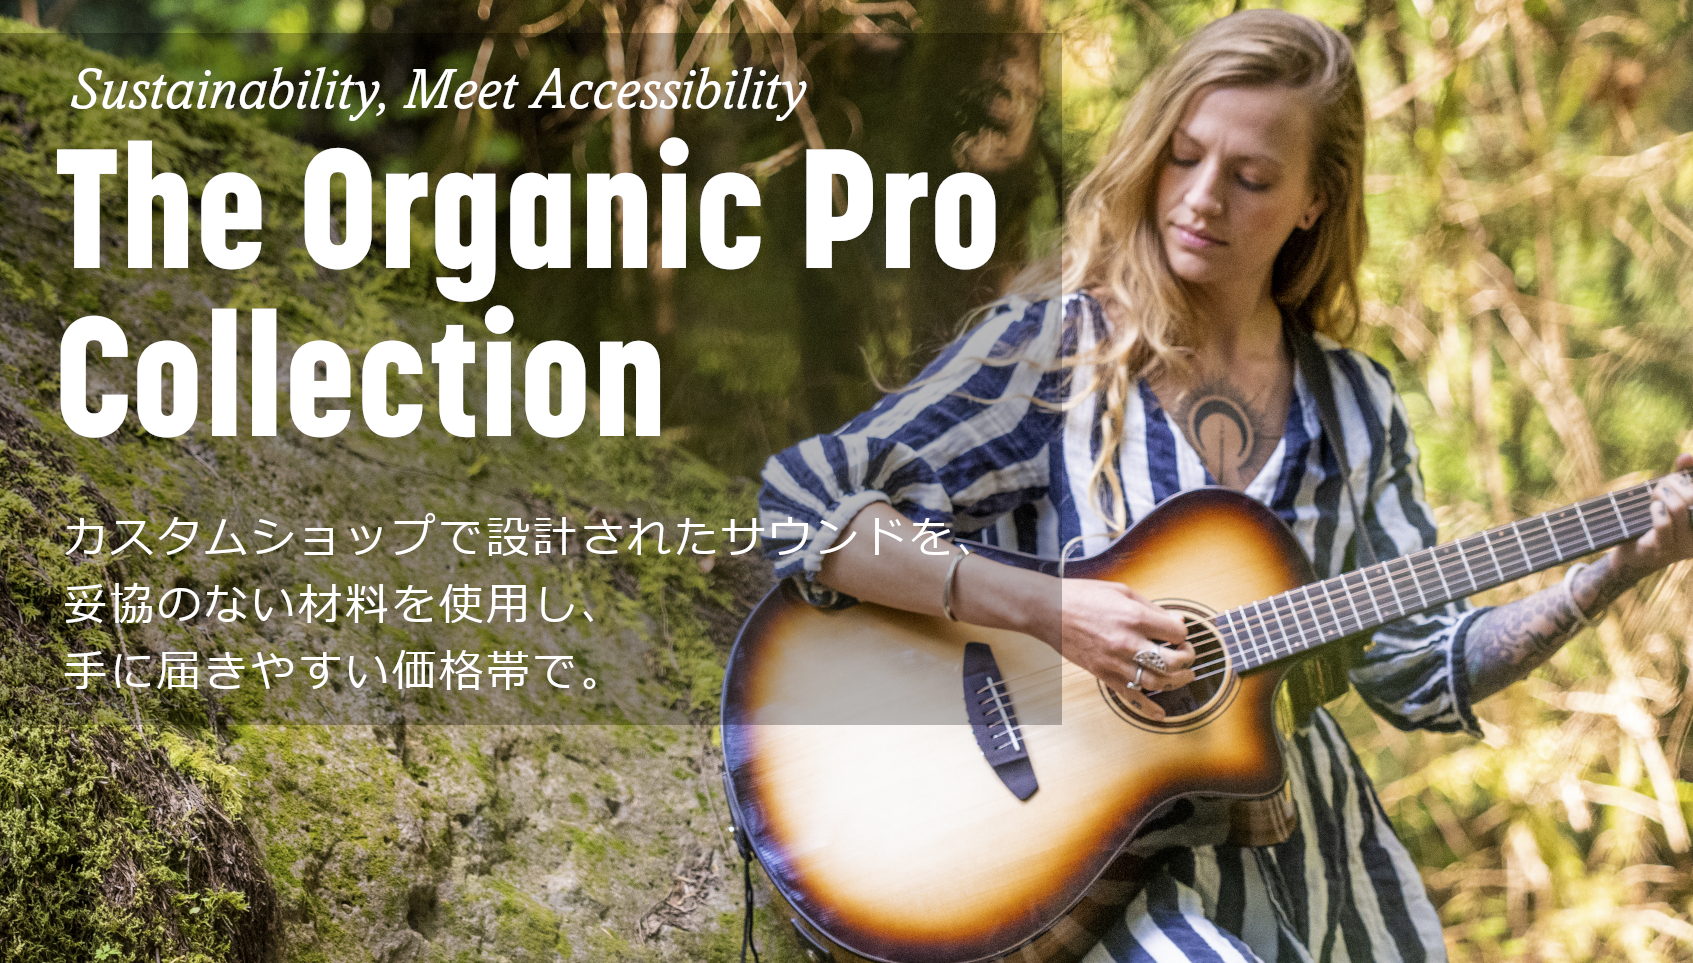 The Organic Pro Collection